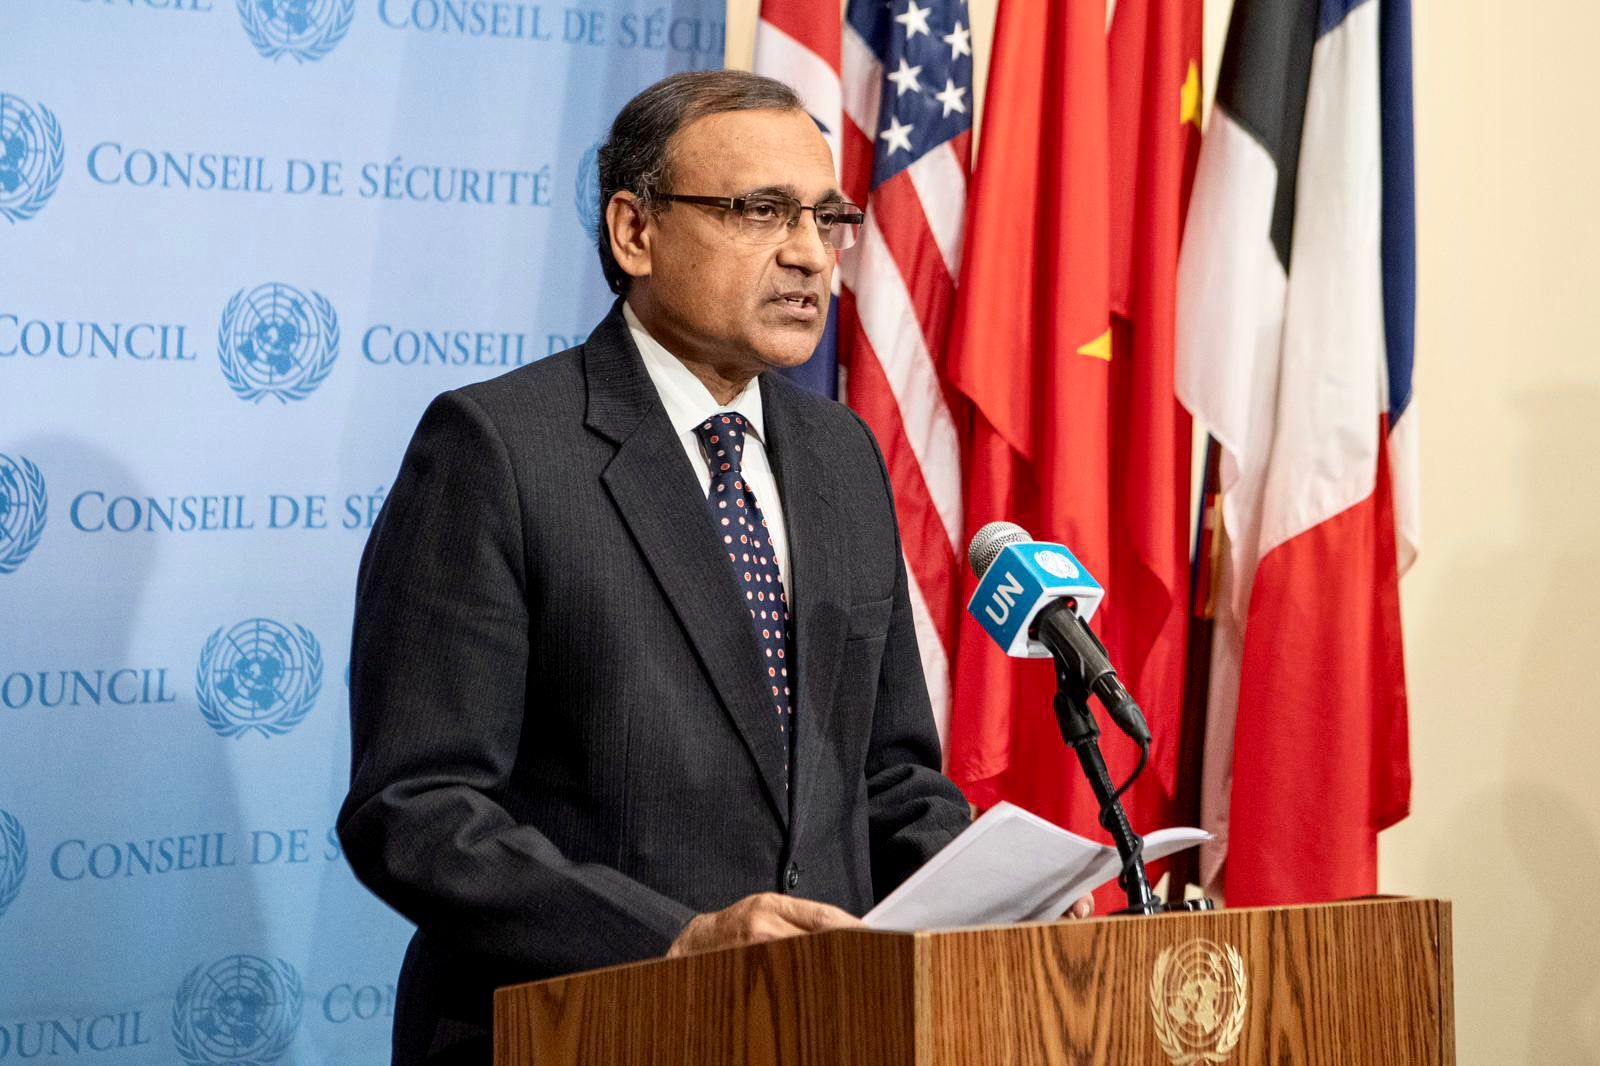 India assumes UNSC presidency with eye on counterterrorism, peacekeeping